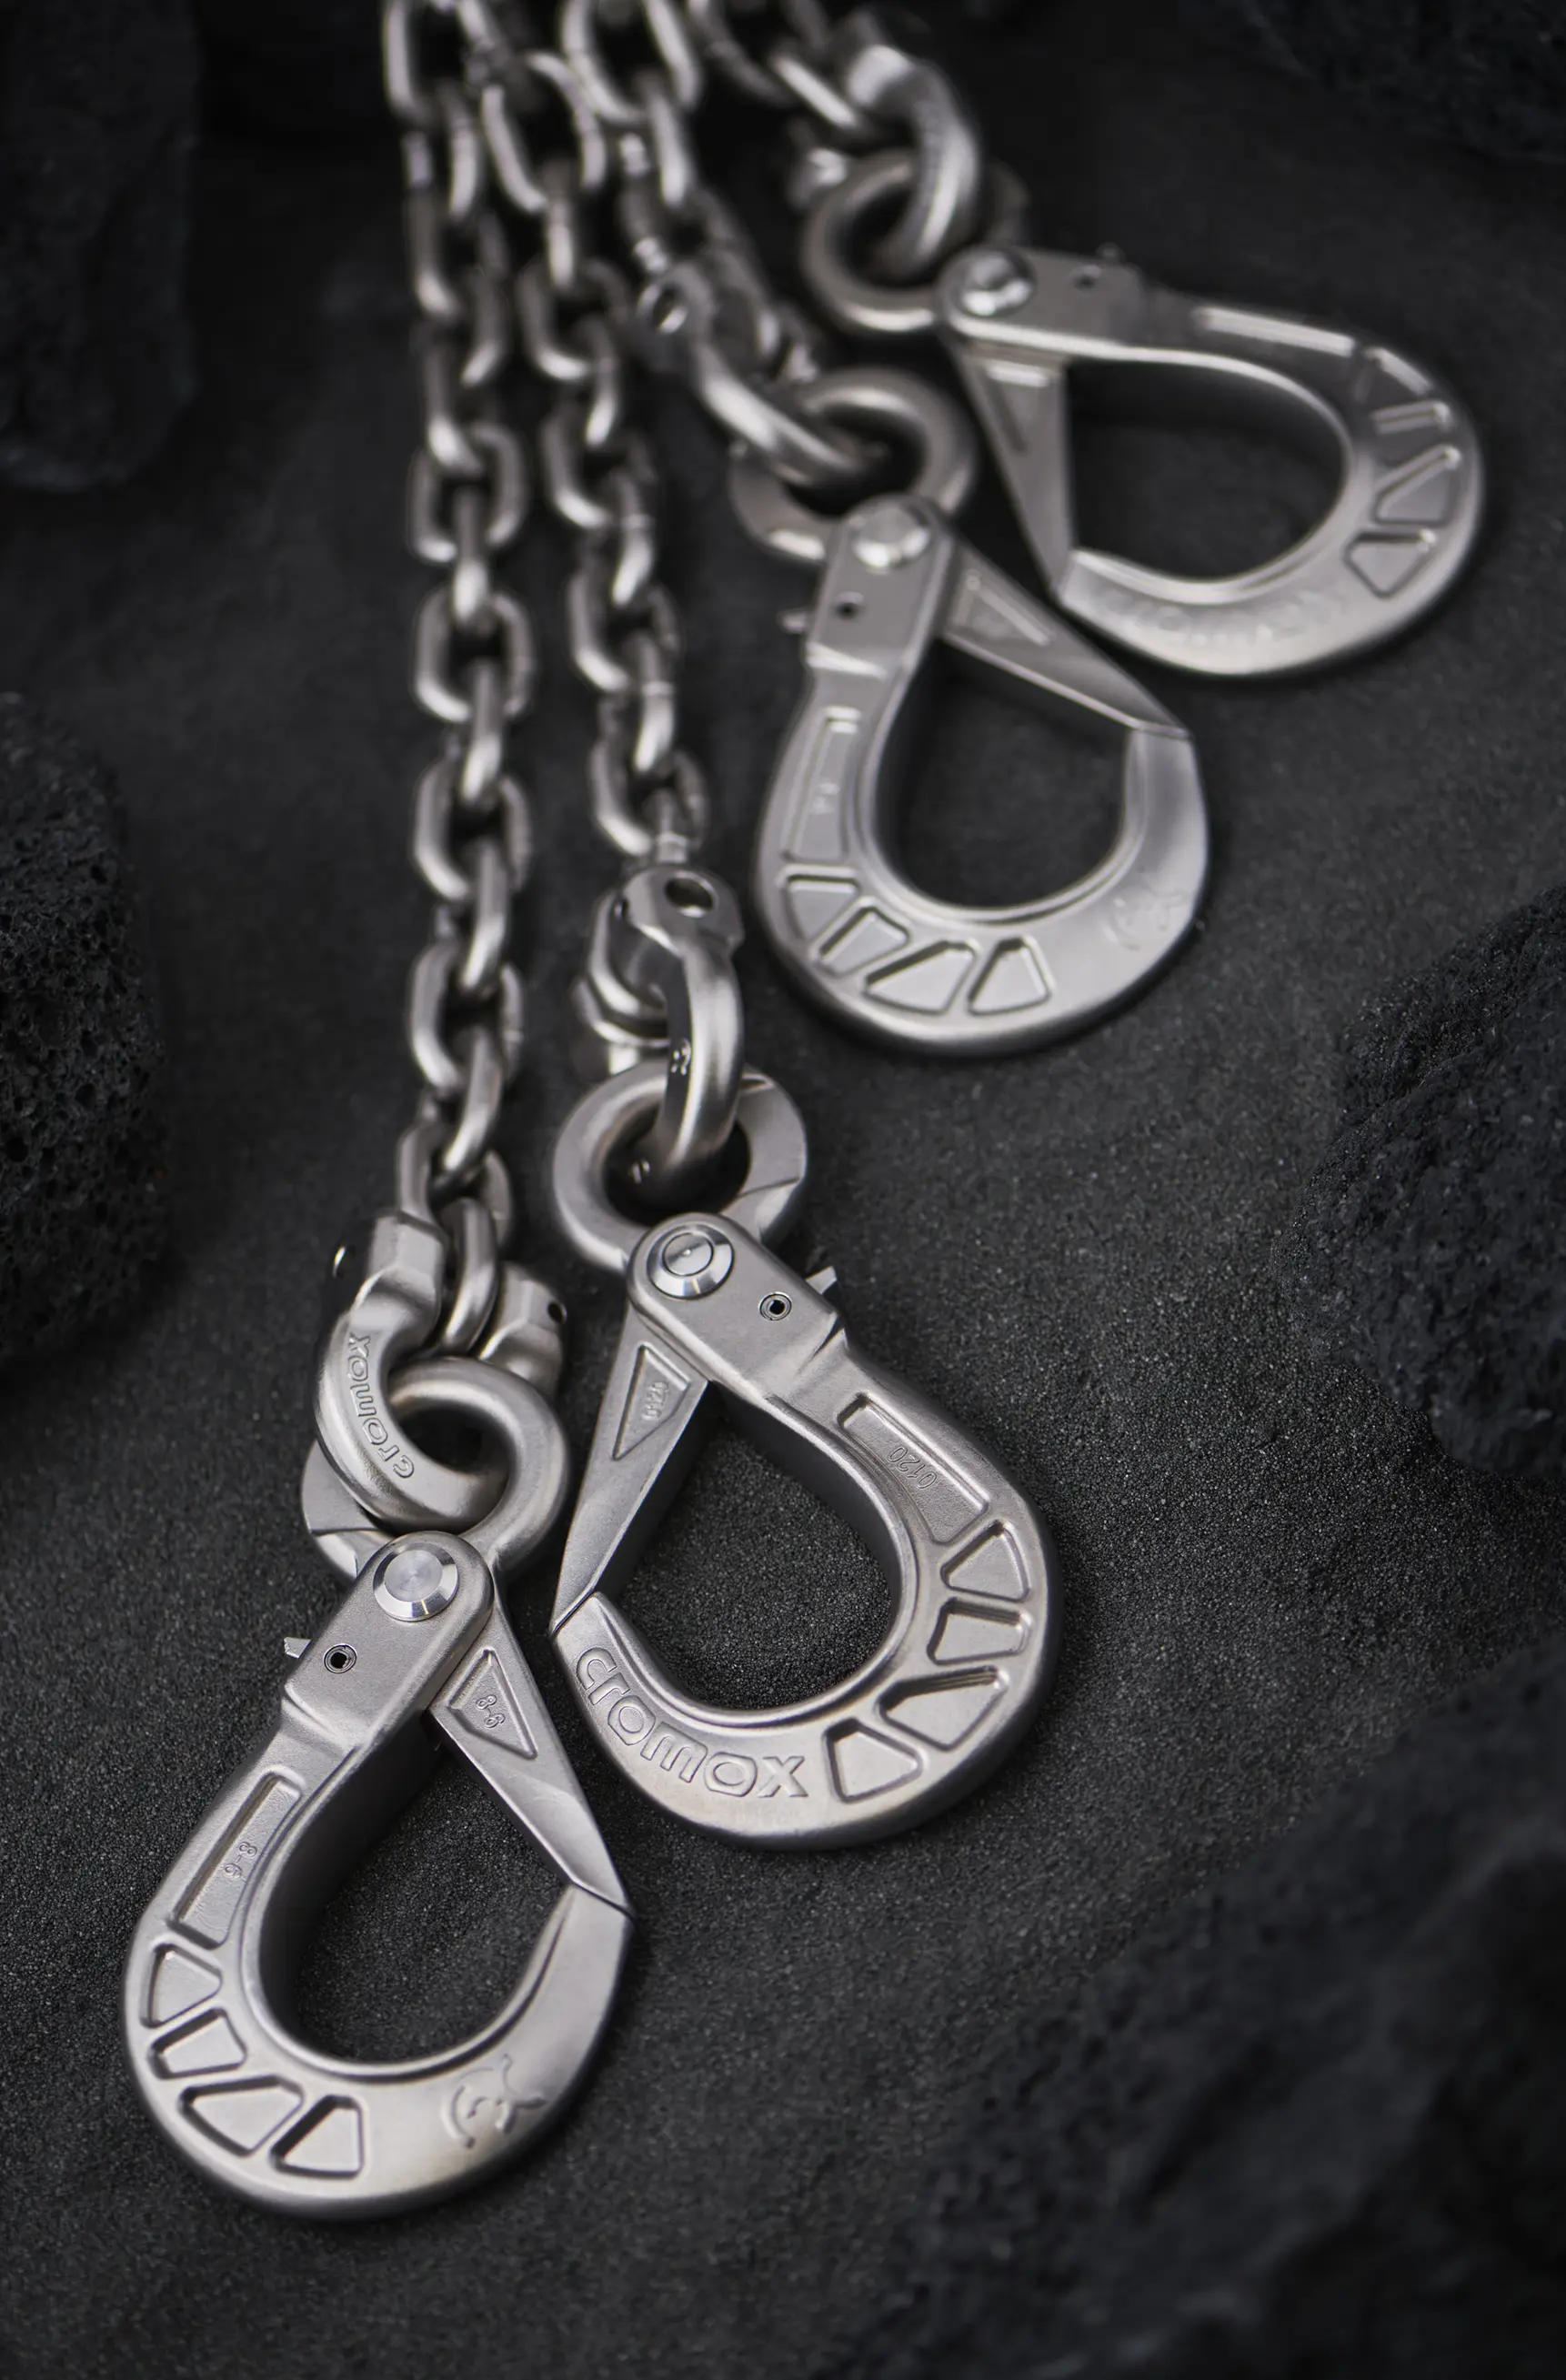 Stainless steel sling chain from cromox® with end fittings for self locking eye hooks